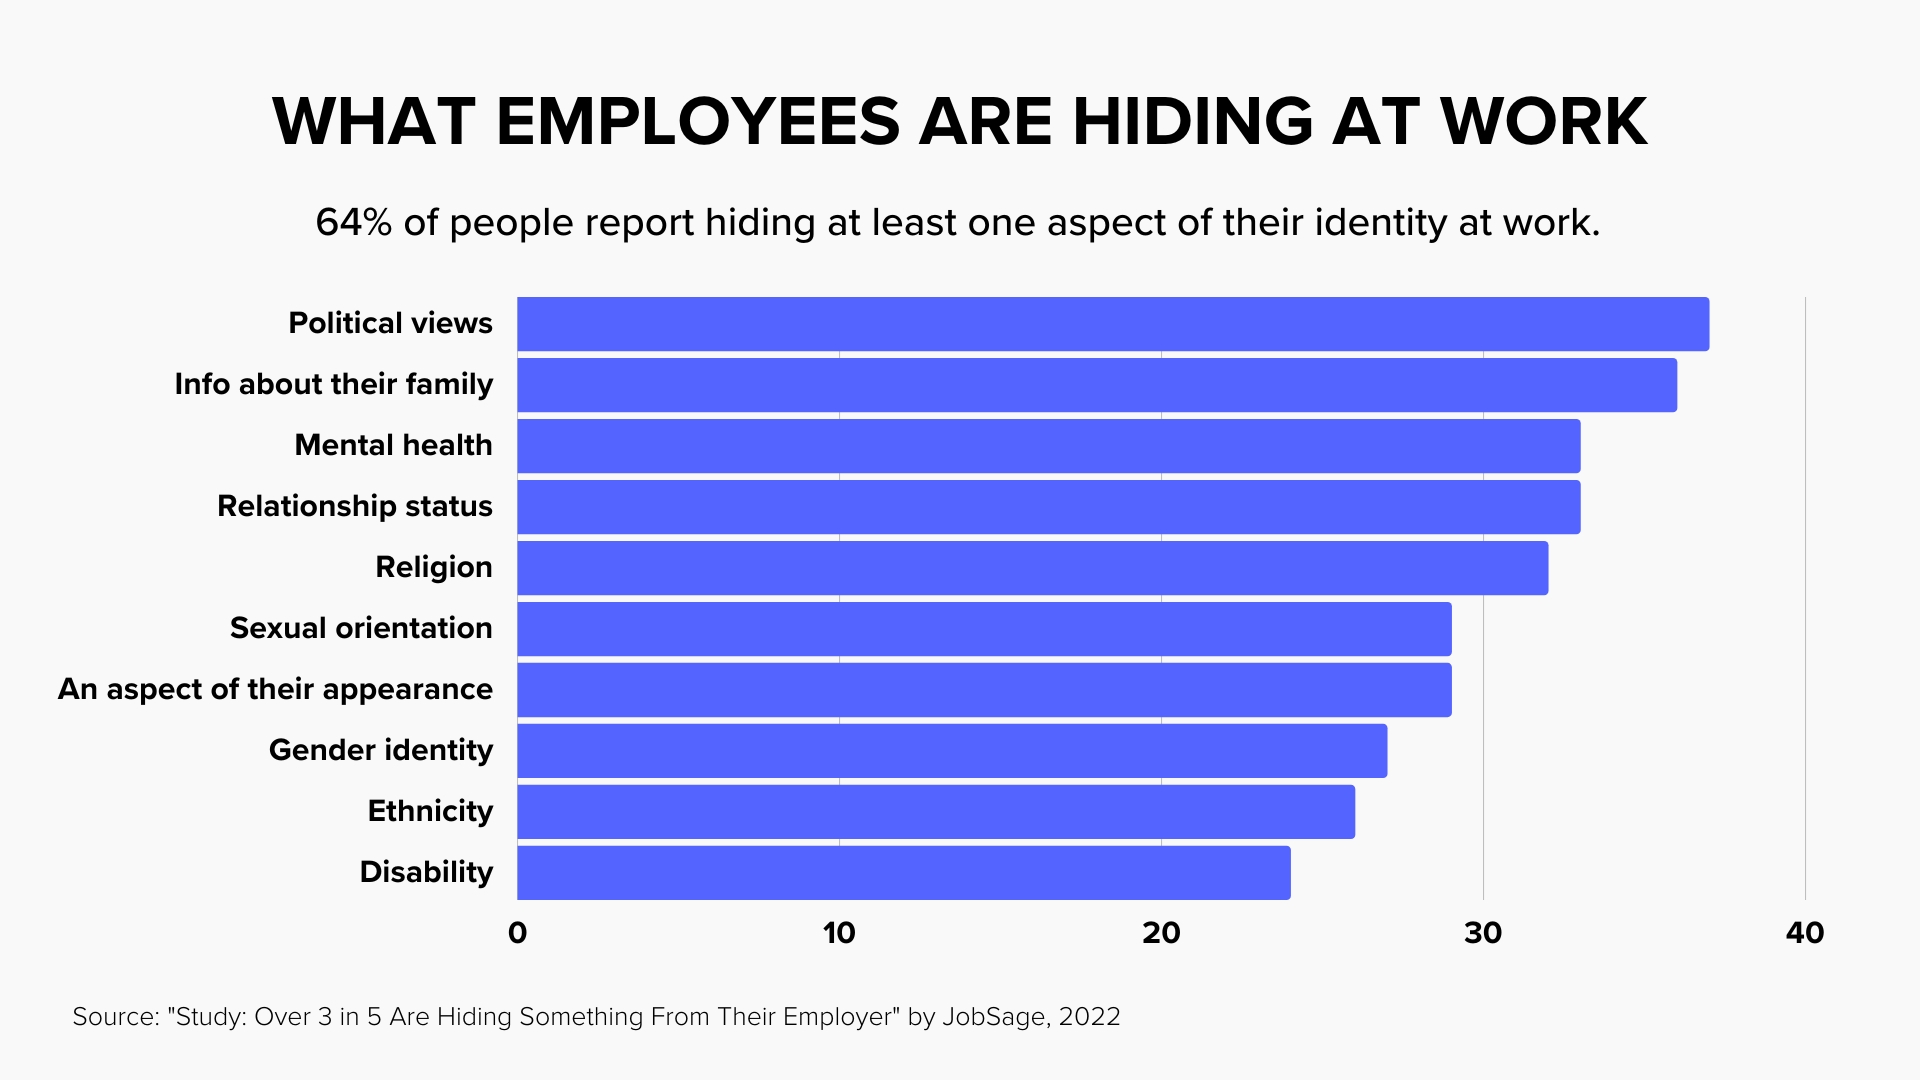 Statistics on what employees are hiding at work